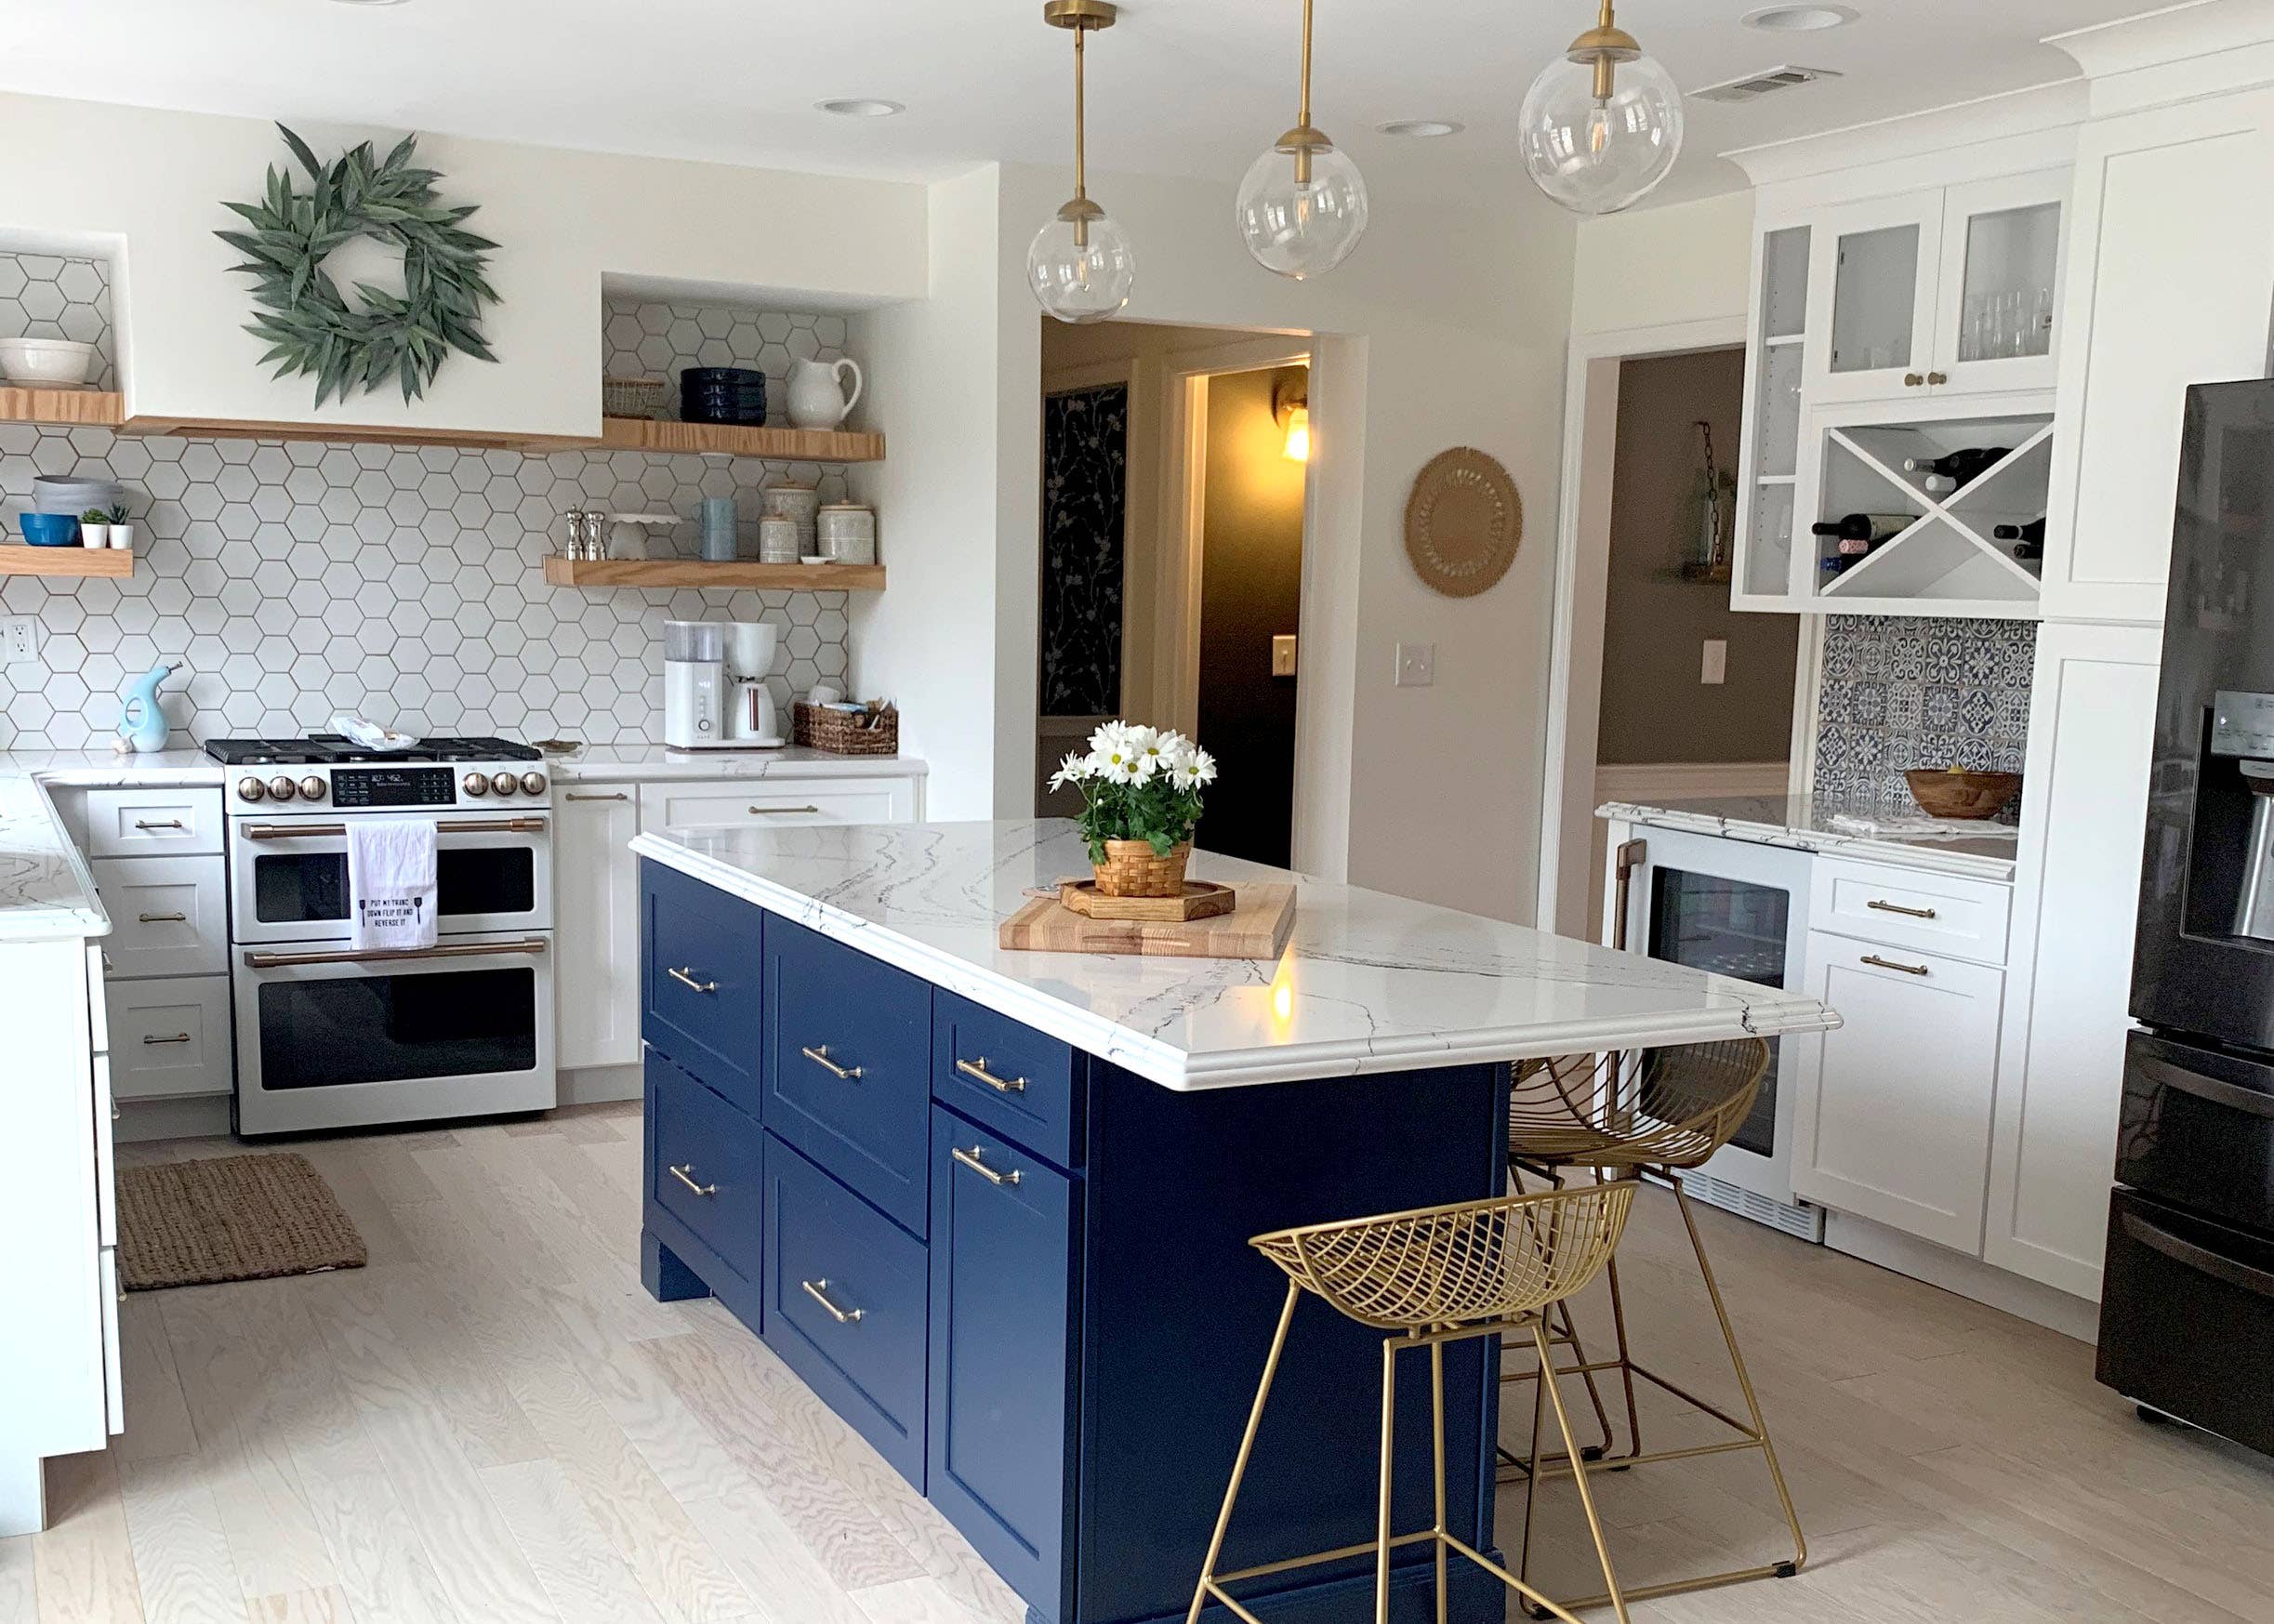 Farmhouse style white shaker kitchen cabinets and navy blue island with gold hardware